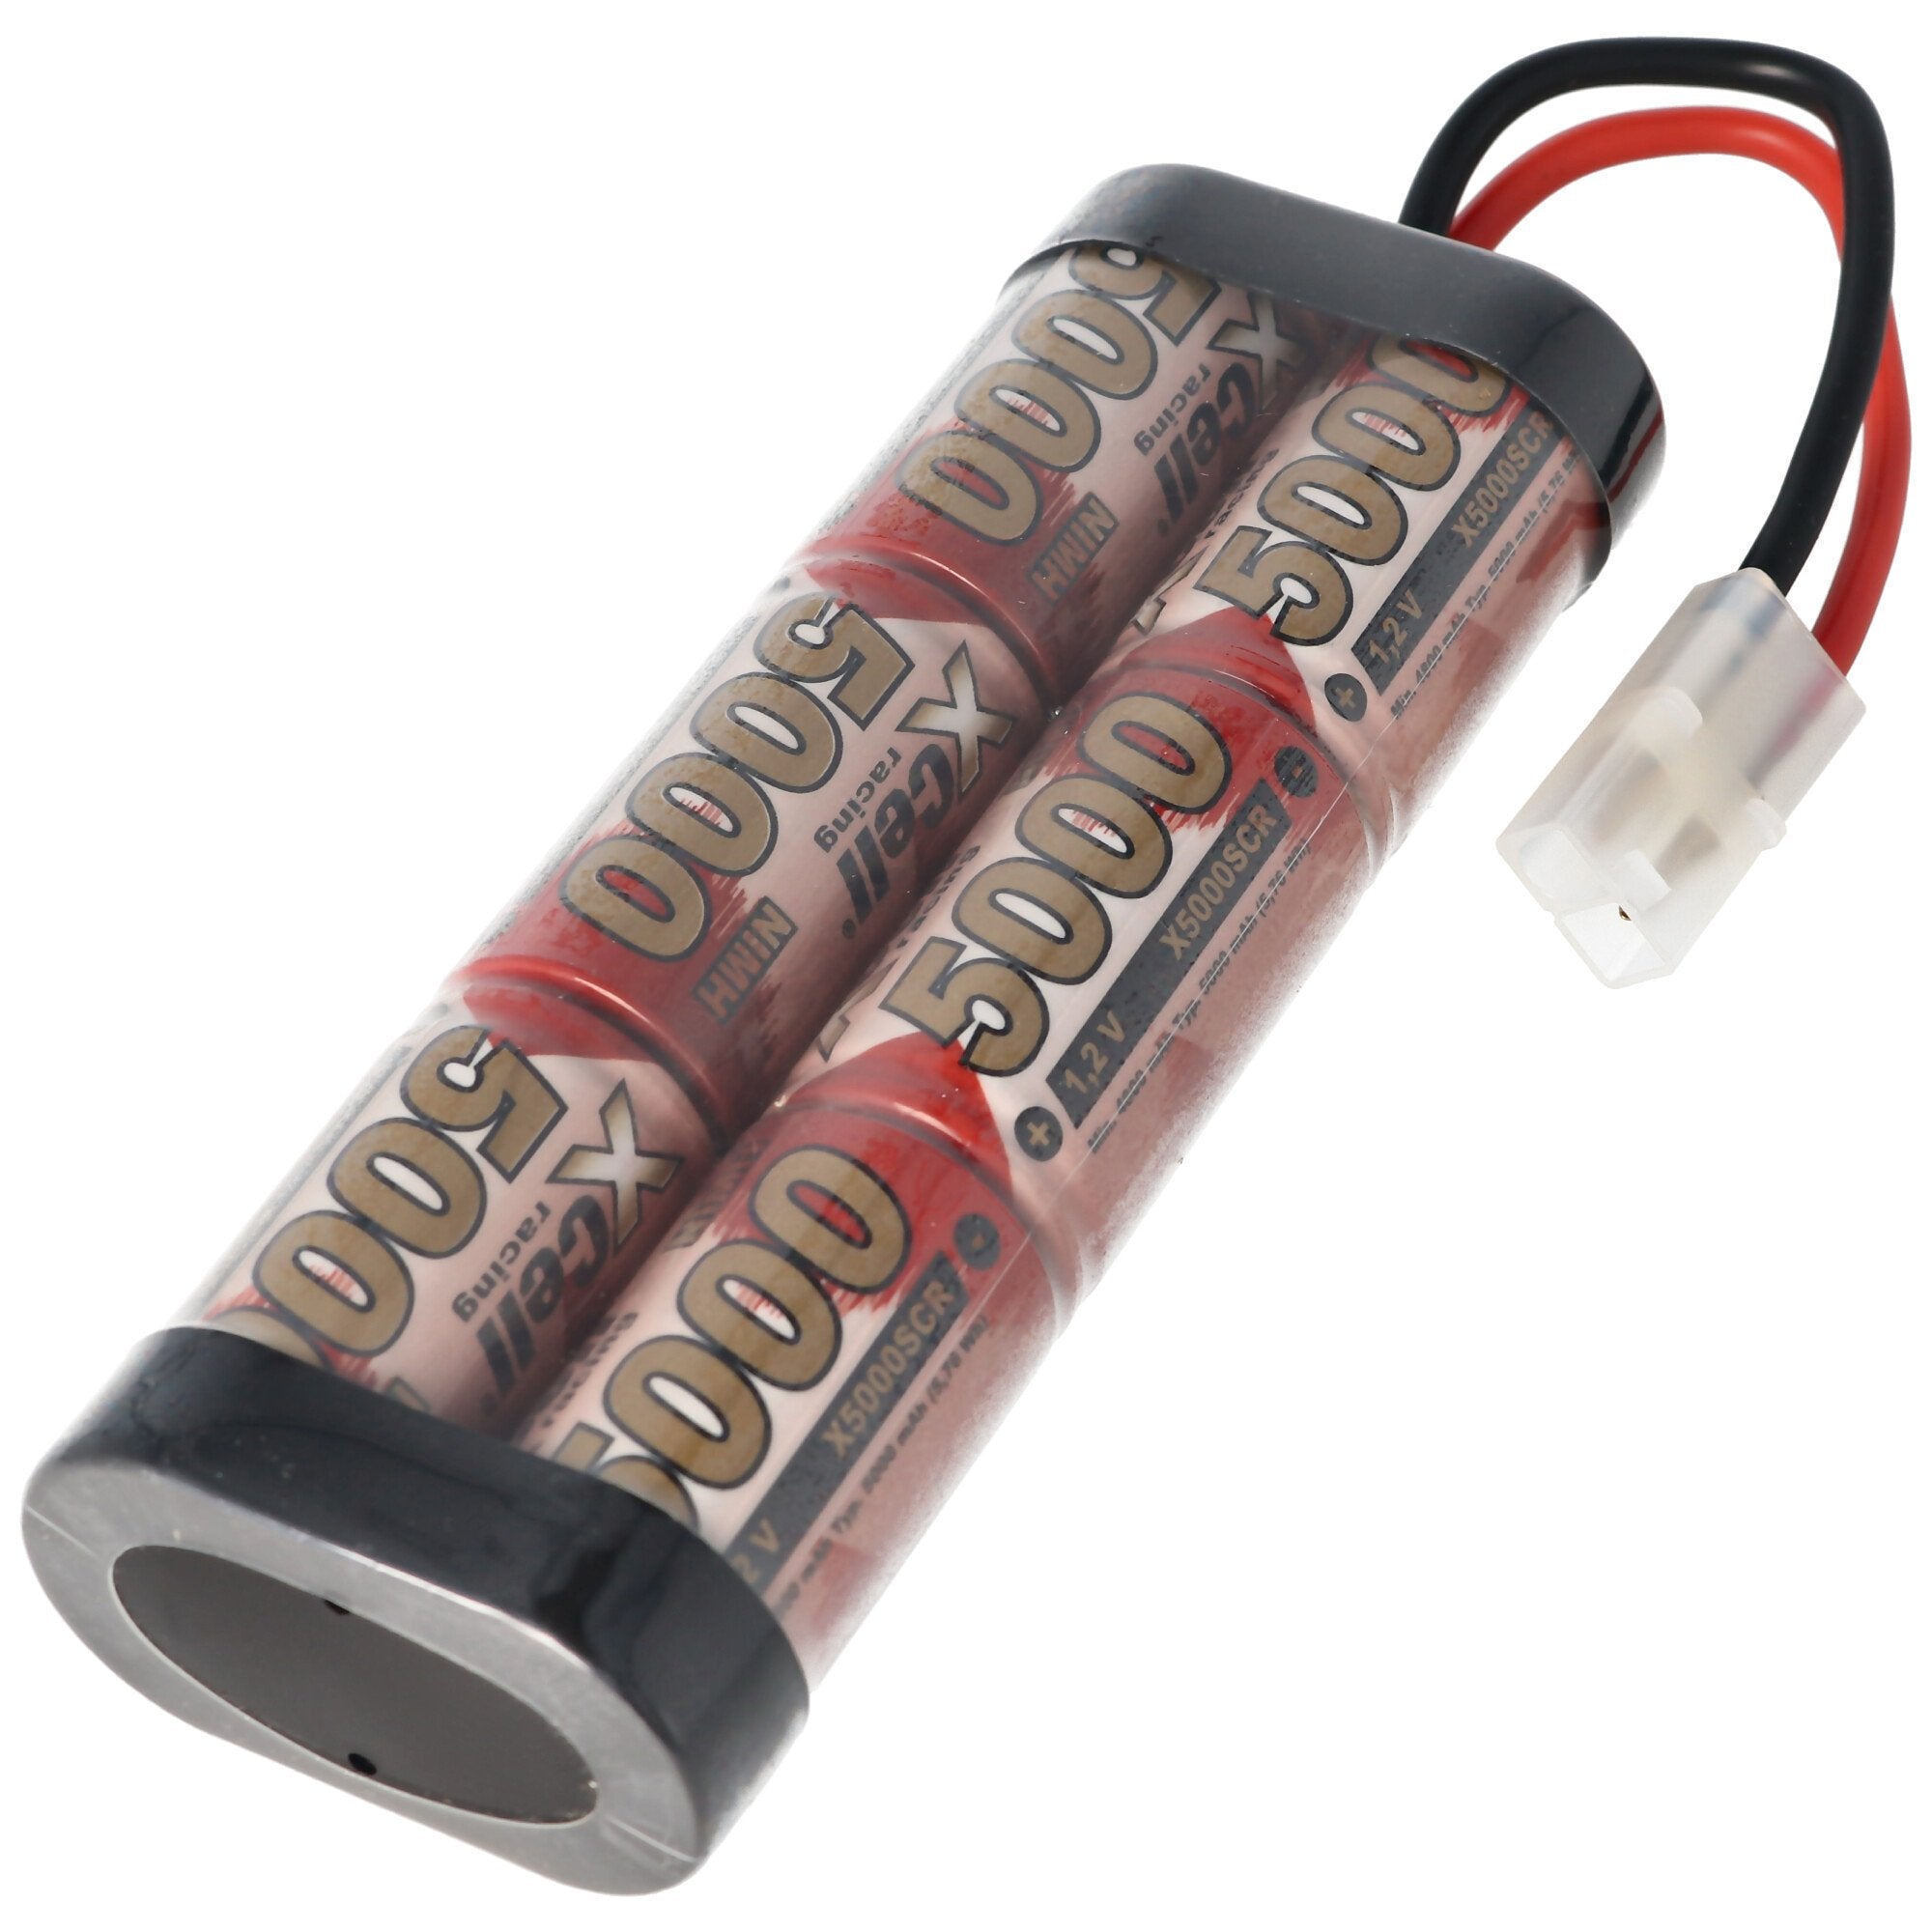 AccuCell Racing Pack 7.2 volts with up to 5000mAh and Tamiya connector